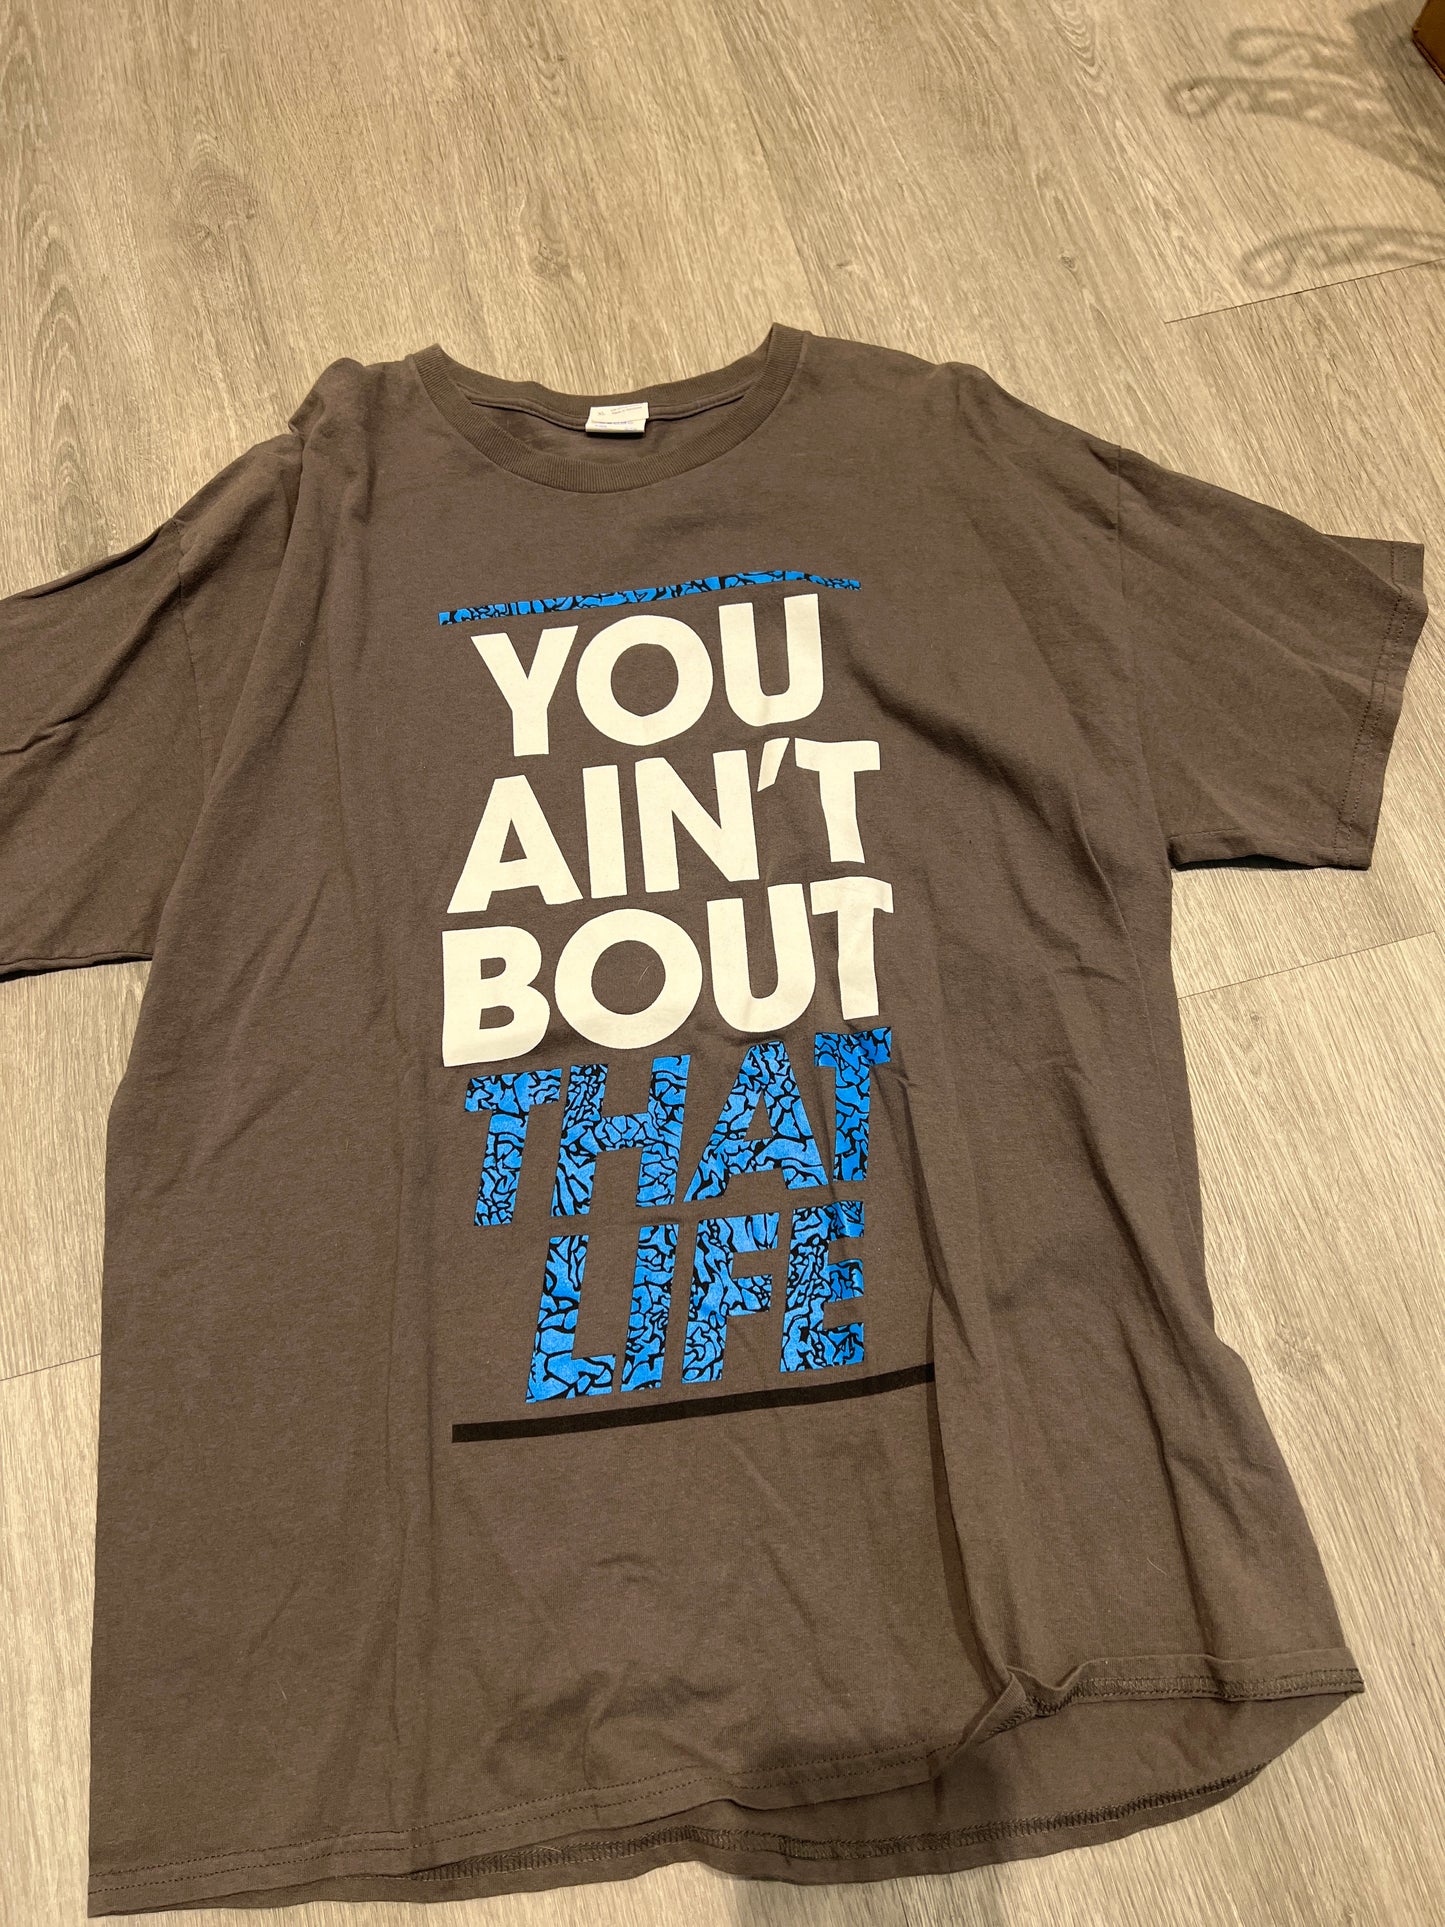 You ain’t bout that life tee